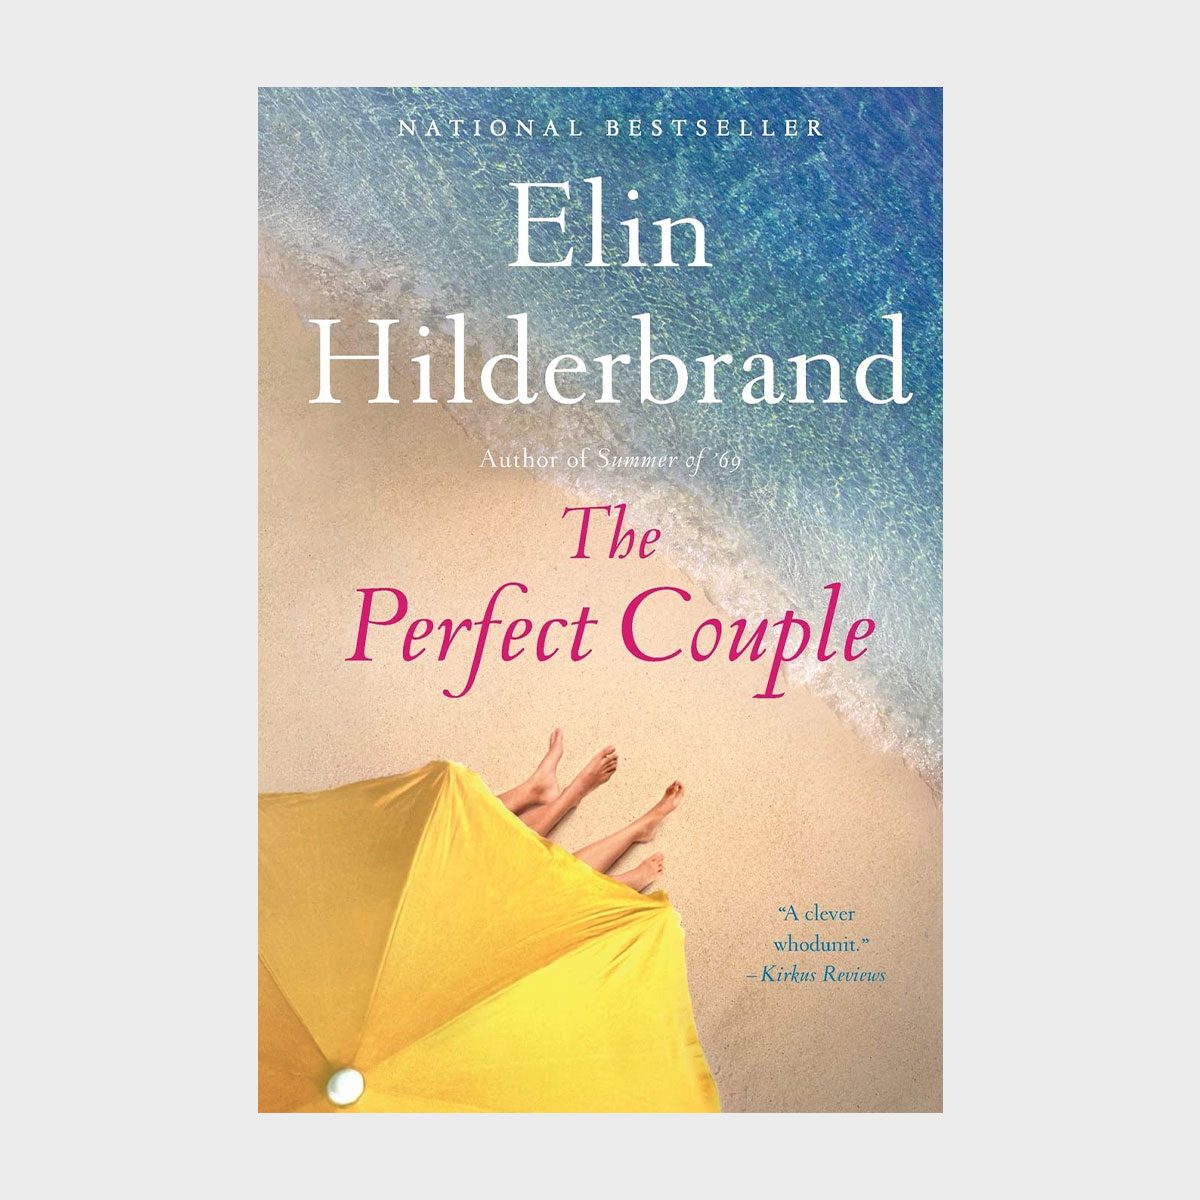 What Is 'The Perfect Couple'? Book Adaptation Turning Into a